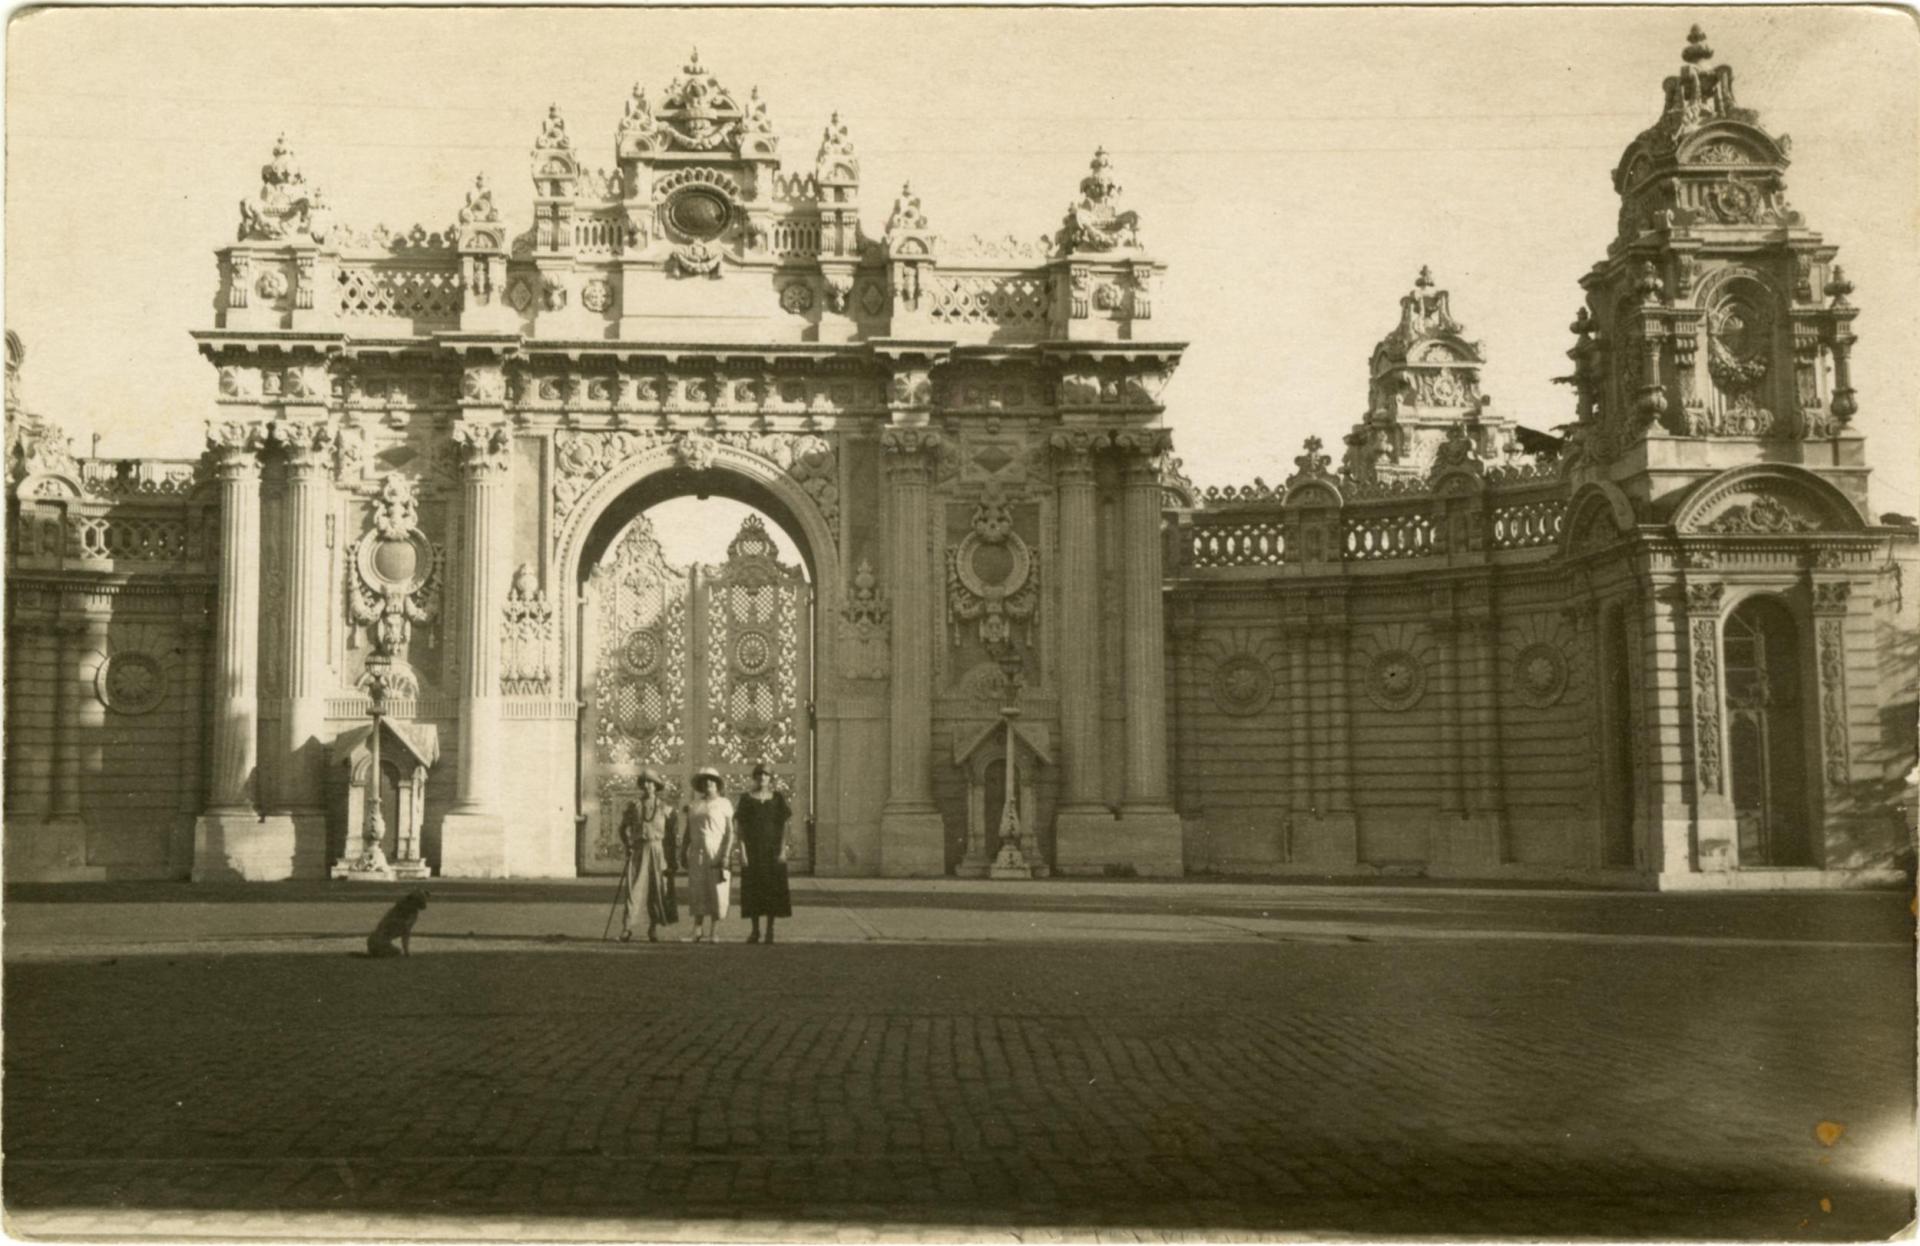 Three women stand before an elaborate gate in Constantinople, circa 1920-30